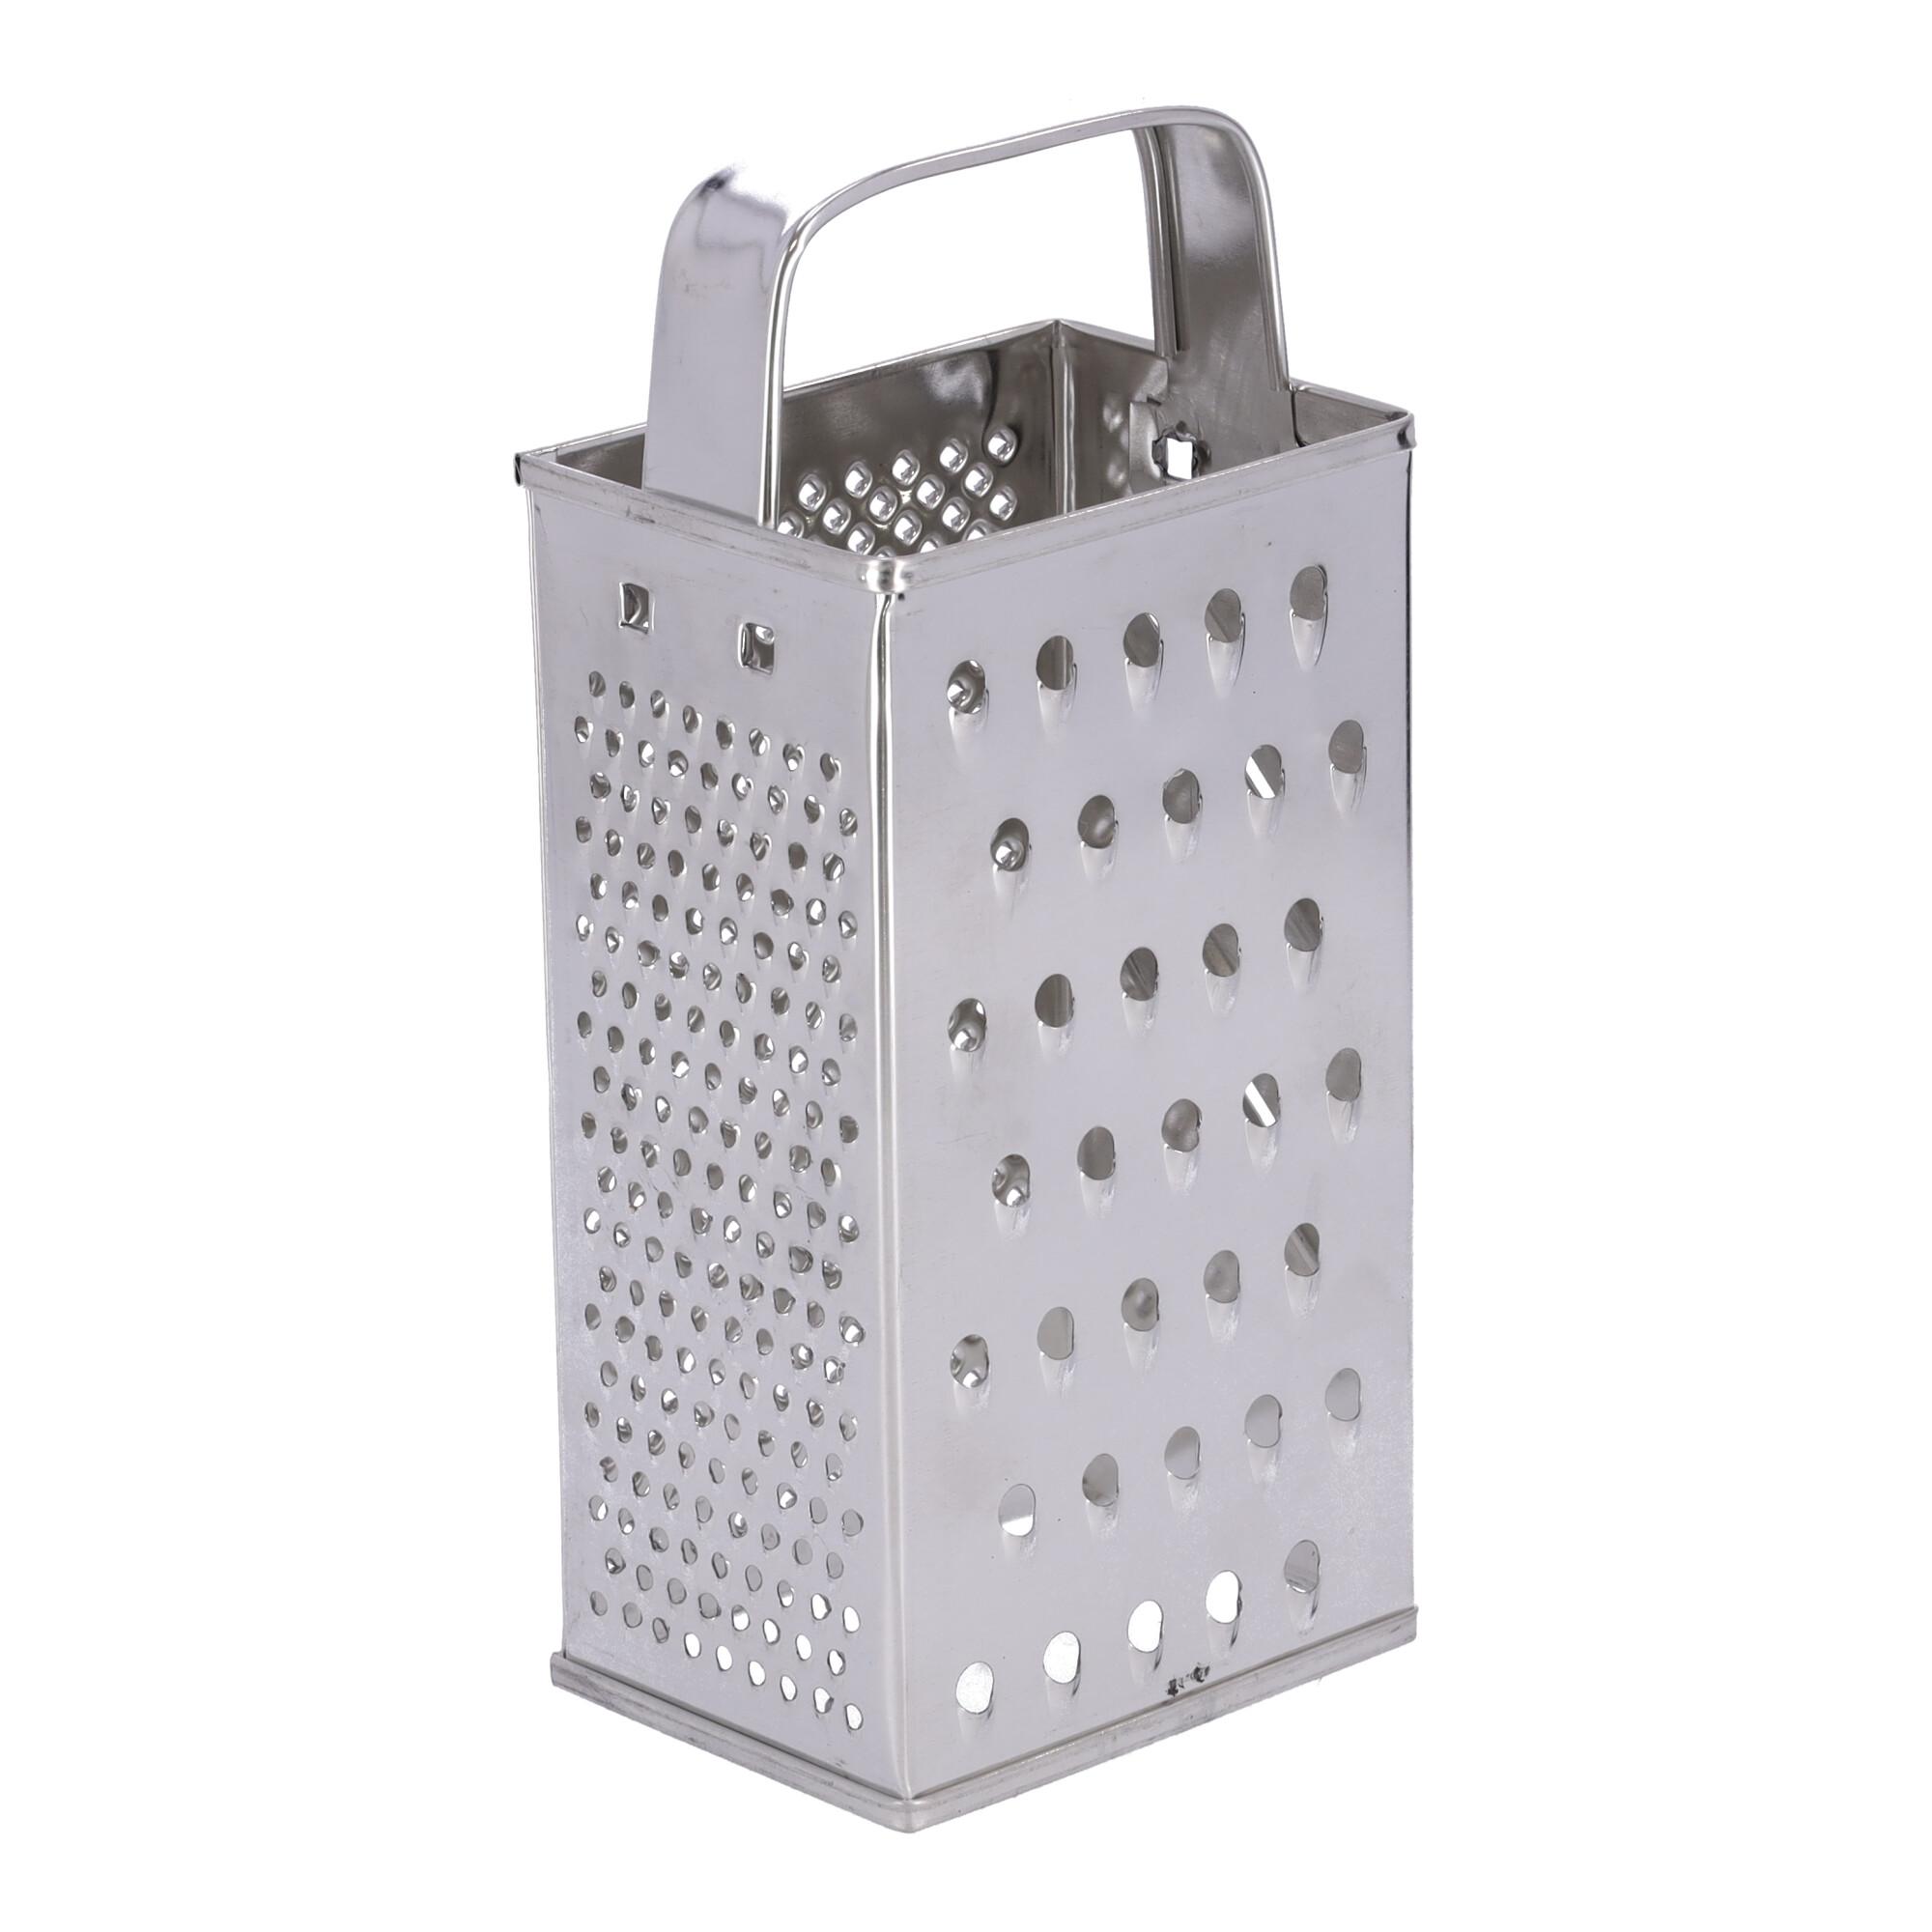 Four-sided kitchen metal grater